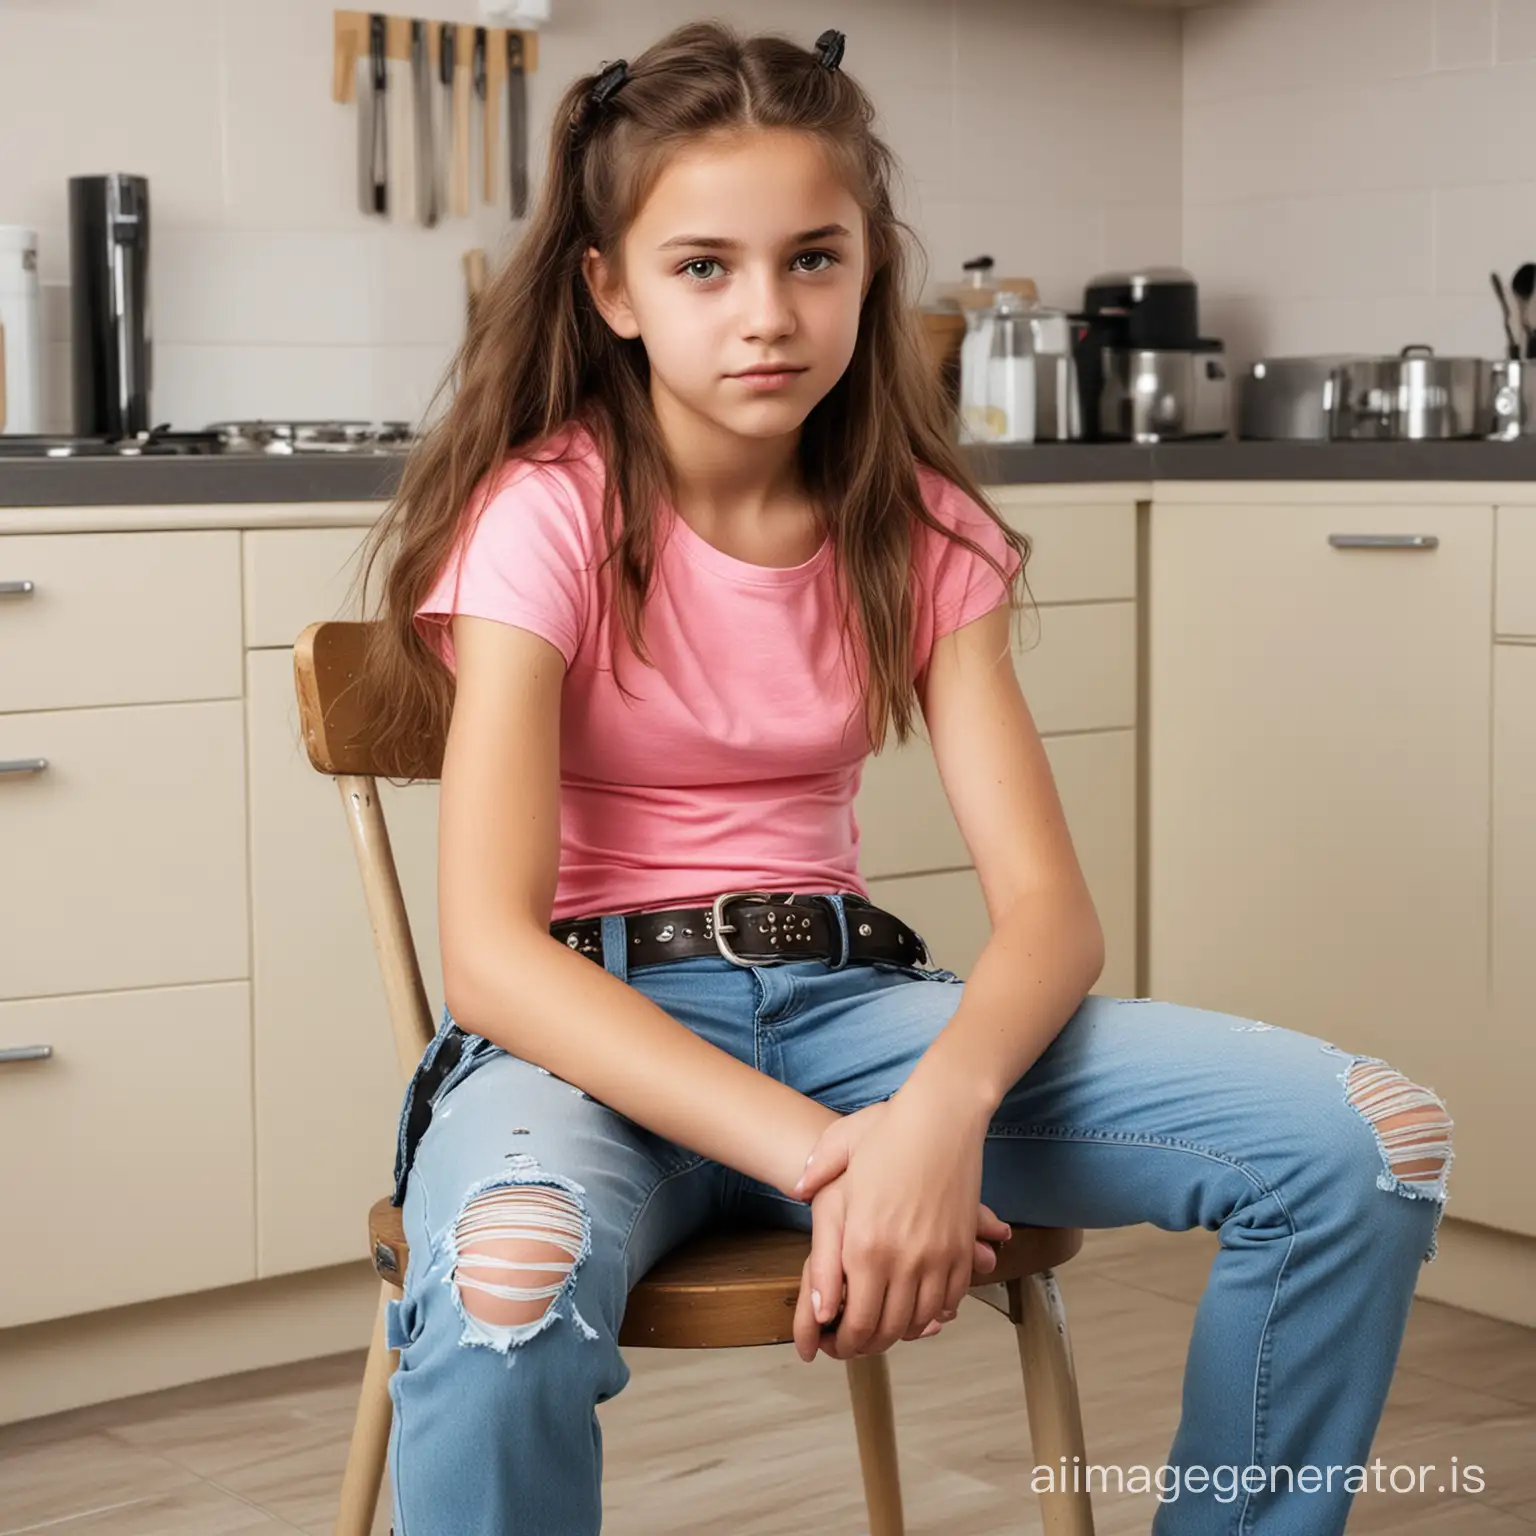 real photo of a girl, 13 years old, sitting on a chair, ripped tight jeans with belt, stern face, kitchen